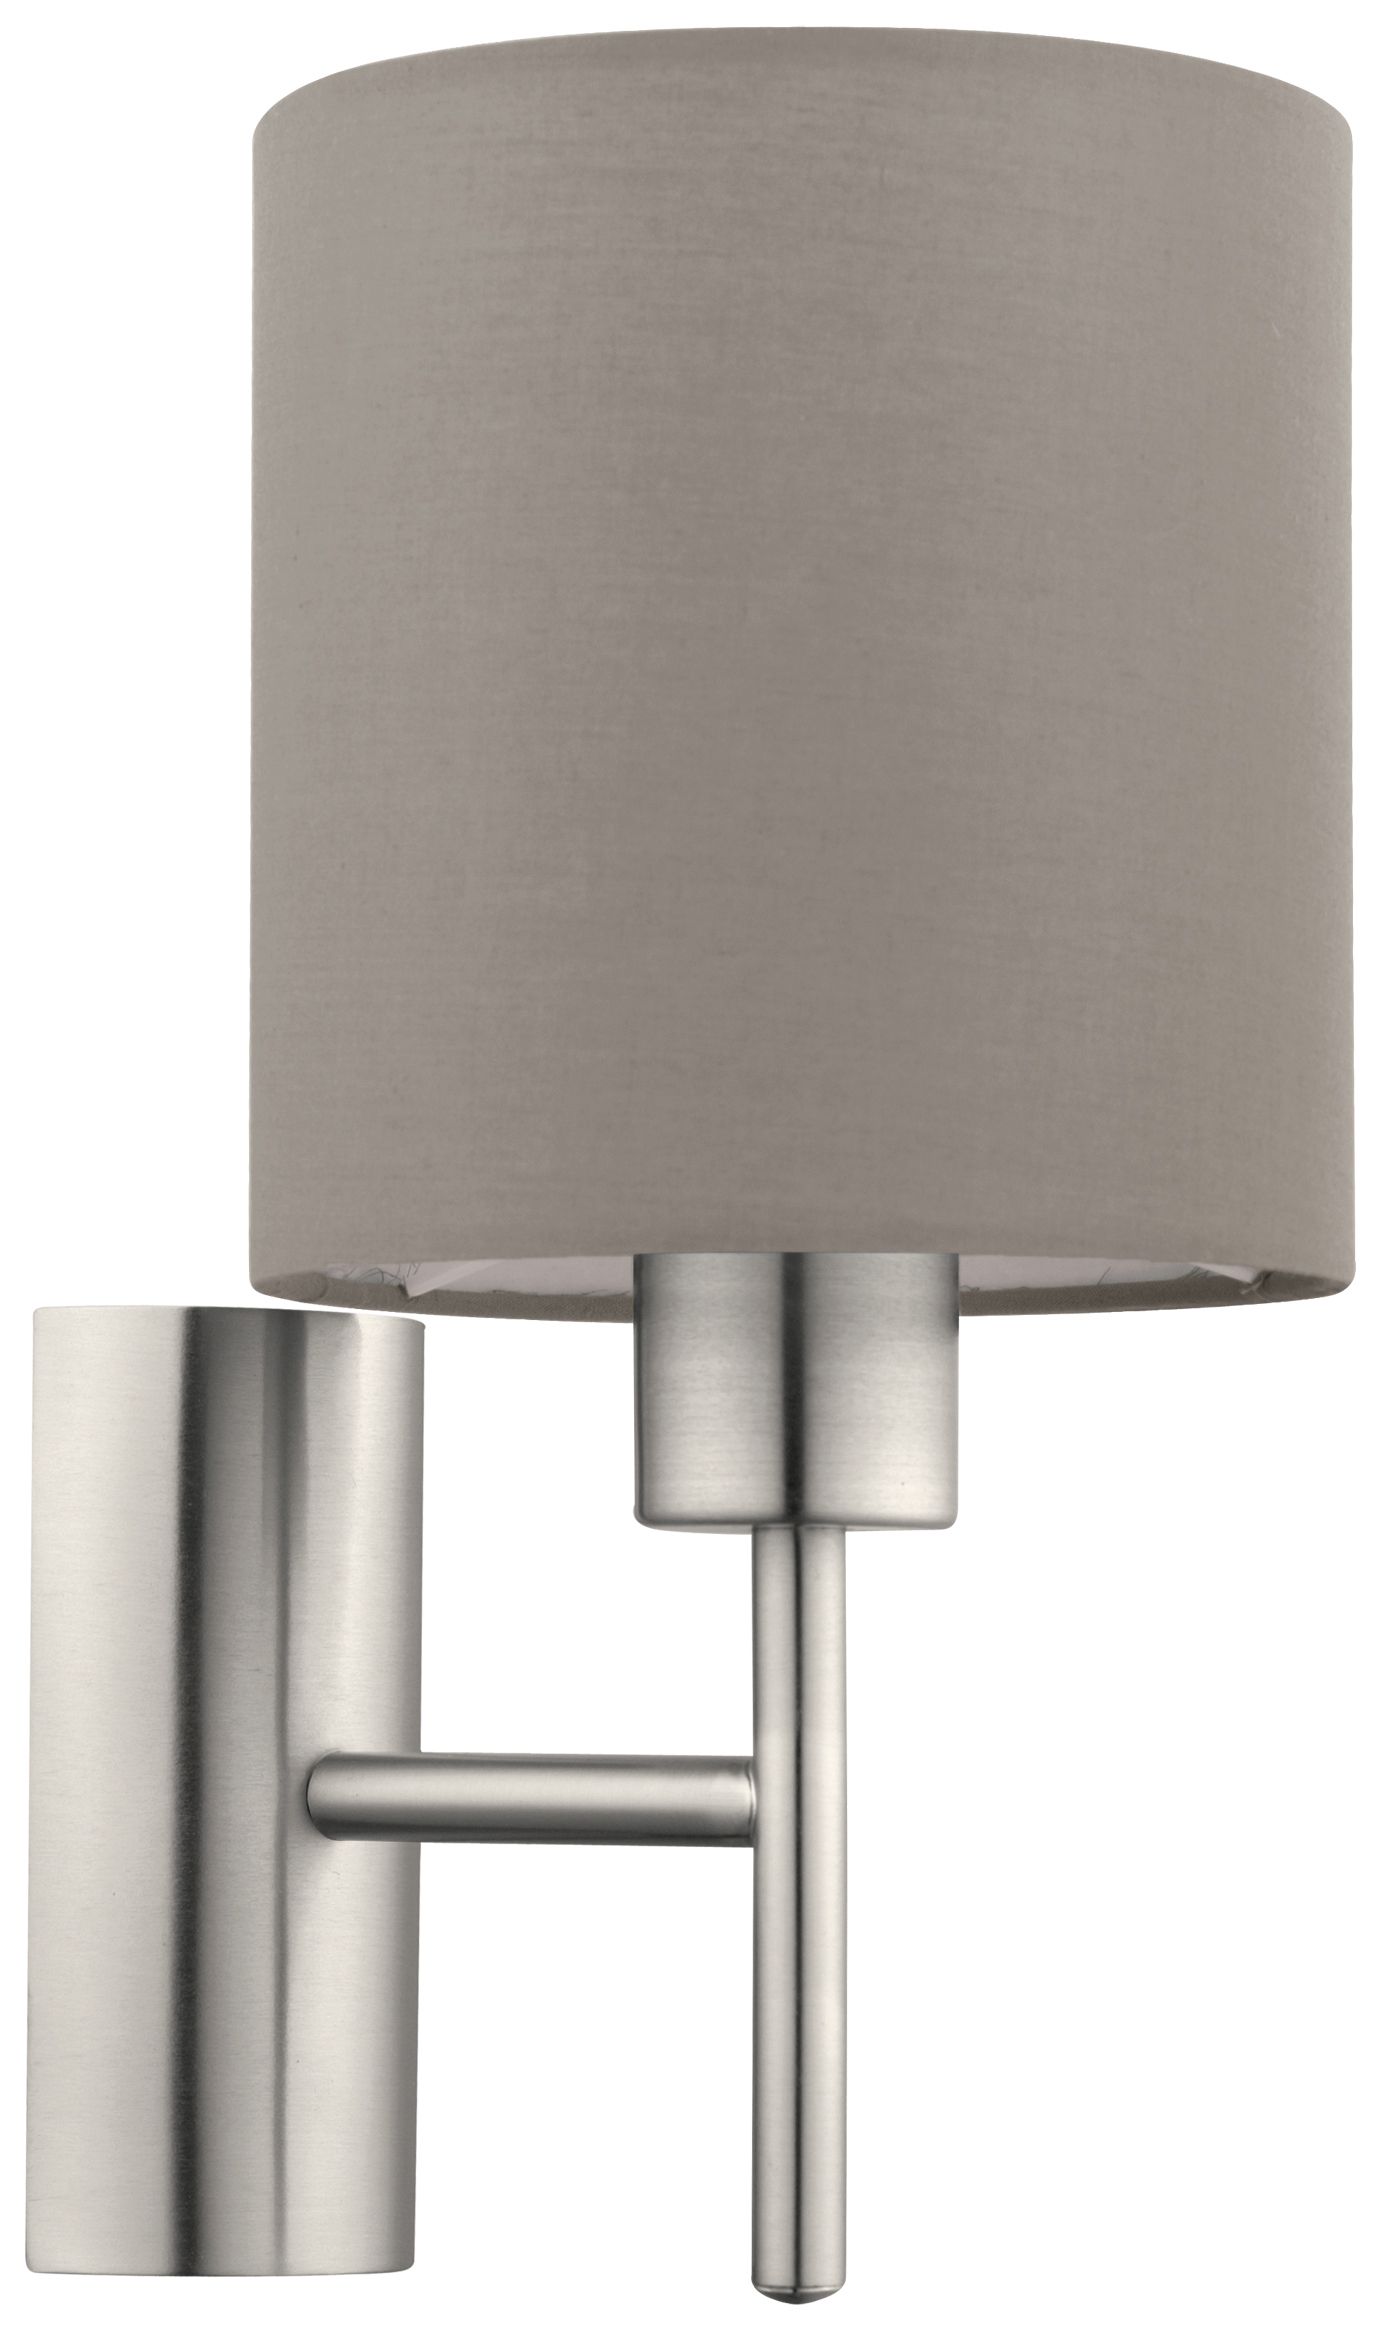 Image of Eglo Pasteri Taupe Wall Light with Switch - 60W